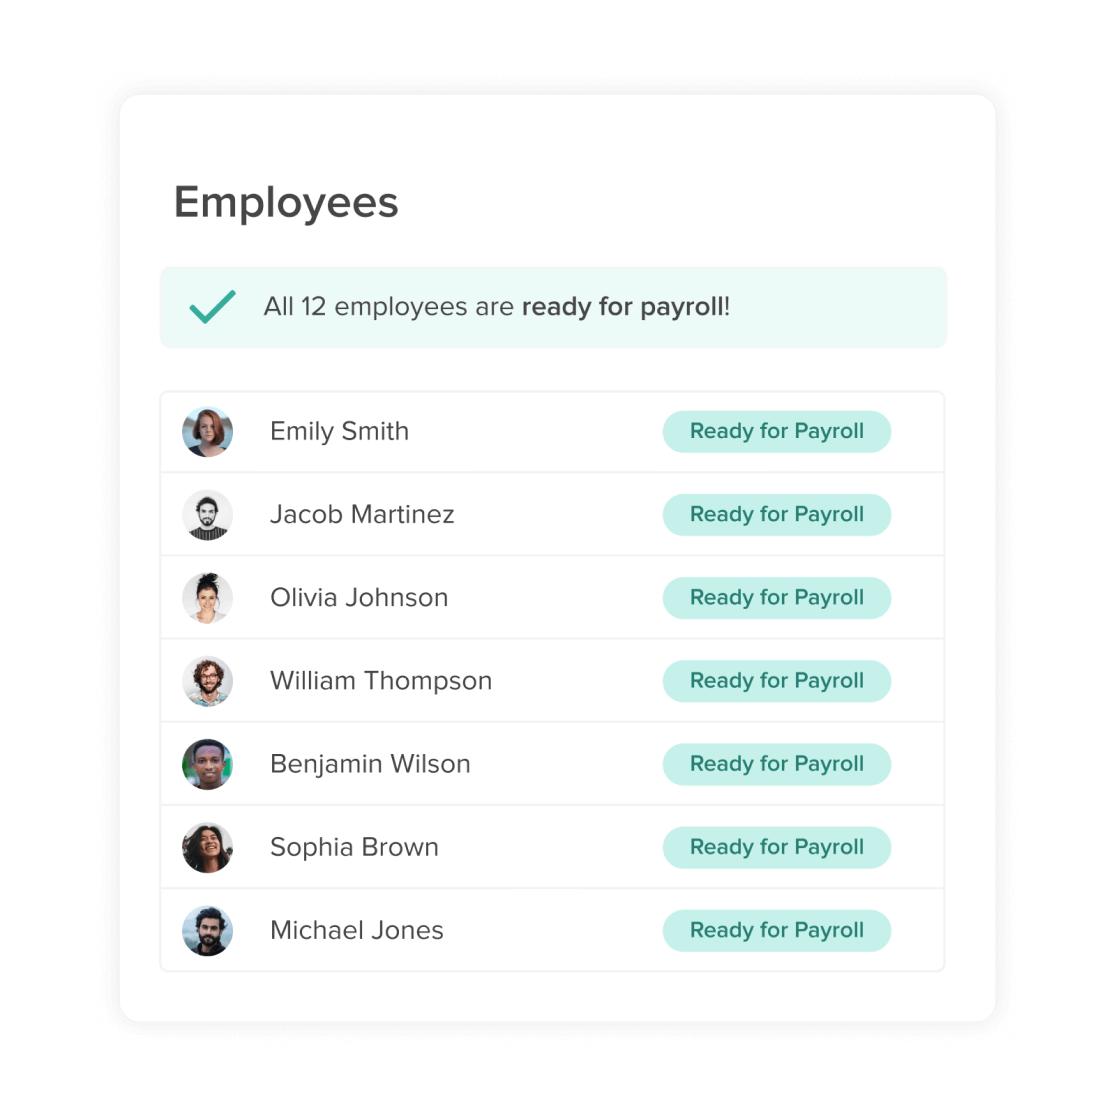 Image showing a comprehensive employee record management interface in the 7shifts app, including time-clocking, attendance, payroll, and other related features.